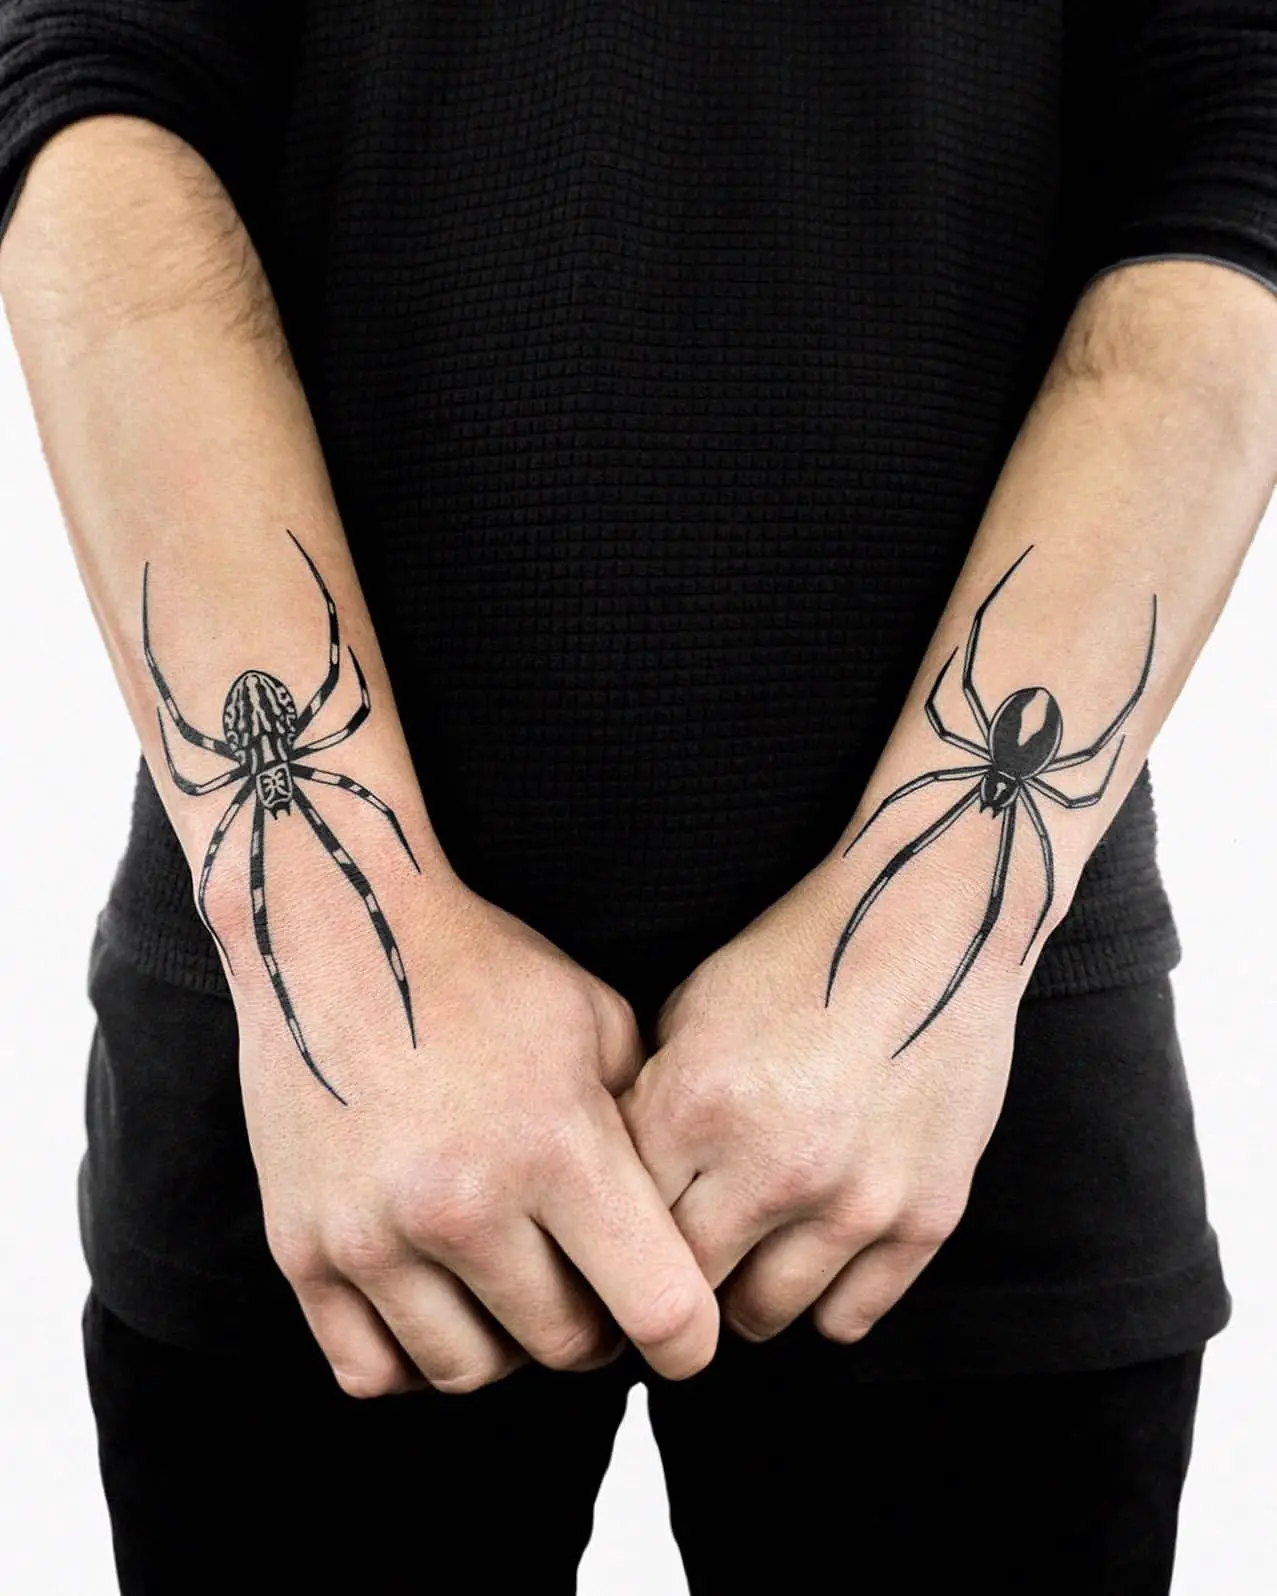 Full picture showing a guy rocking the spider tat on his forearms